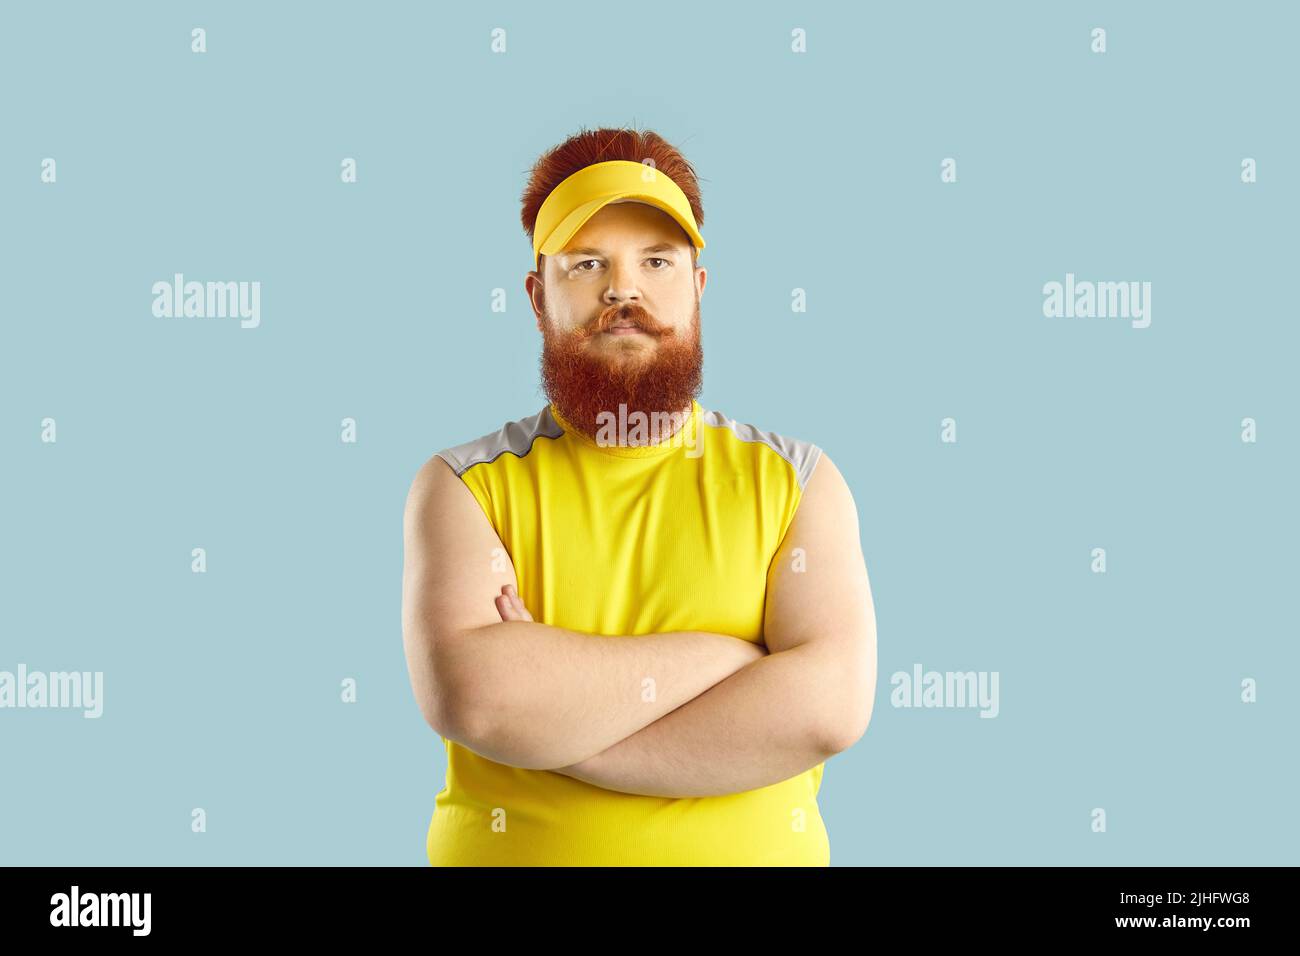 Angry displeased fat athlete standing with his arms crossed isolated on blue background Stock Photo